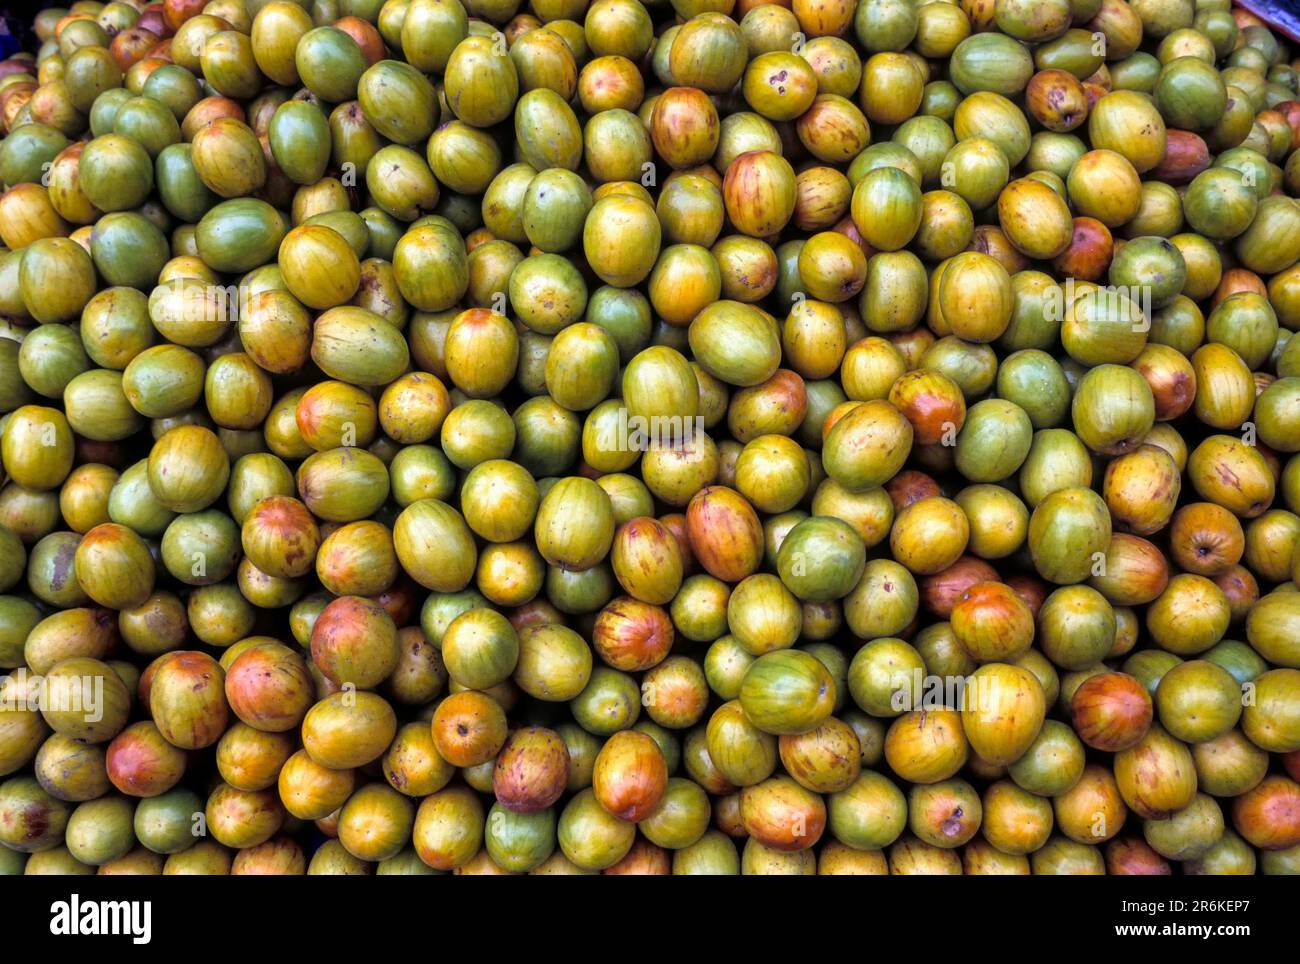 Indian jujube (Zizyphus mauritiana lam) Indian plum, Chinese date, Chinese apple fruits in Tamil Nadu, South India, India, Asia Stock Photo